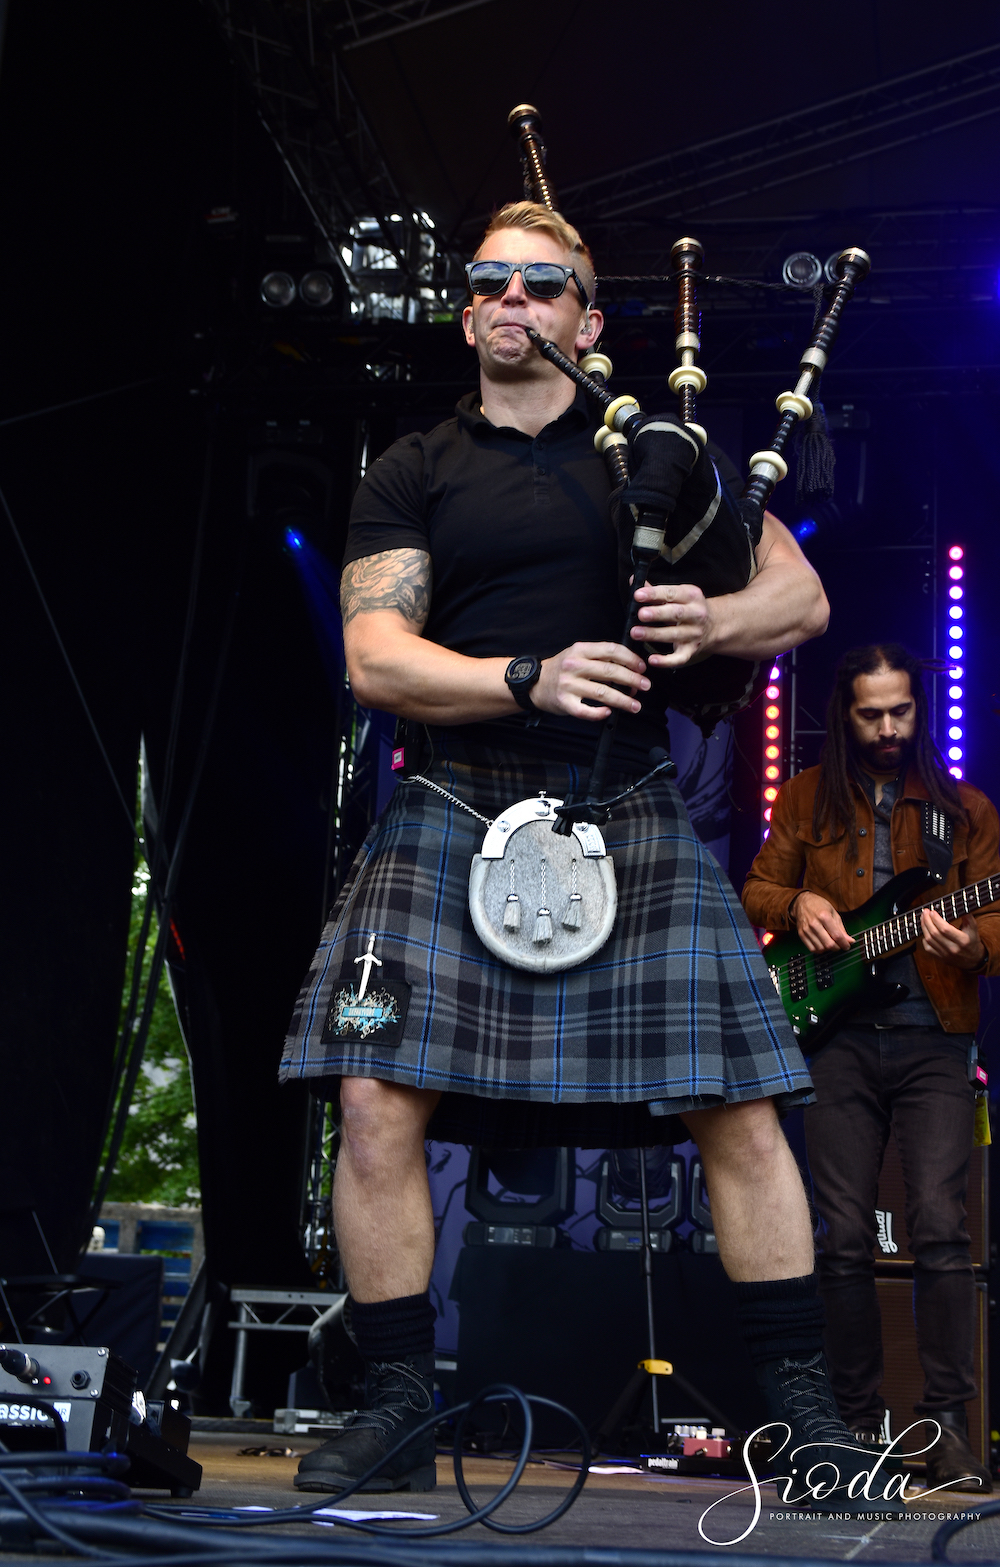 Skerryvore at Gathering 2022 Image No 1028 - The Gathering 2022 - Images